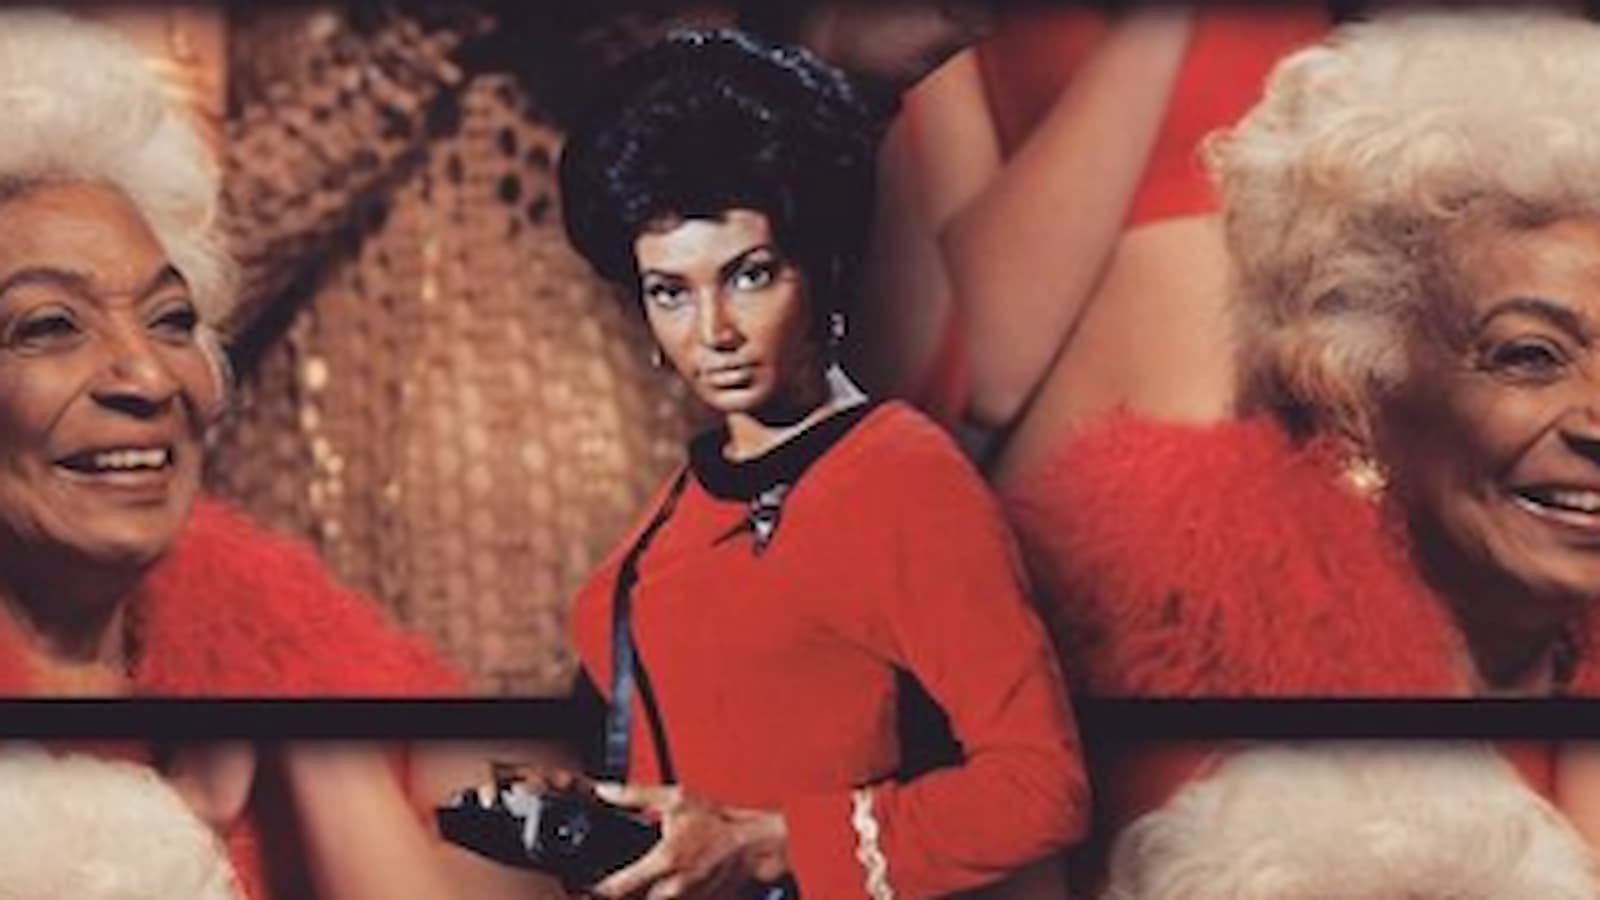 Nichelle Nichols Biography: Age, Height, Birthday, Career, Family, Personal Life, Net Worth